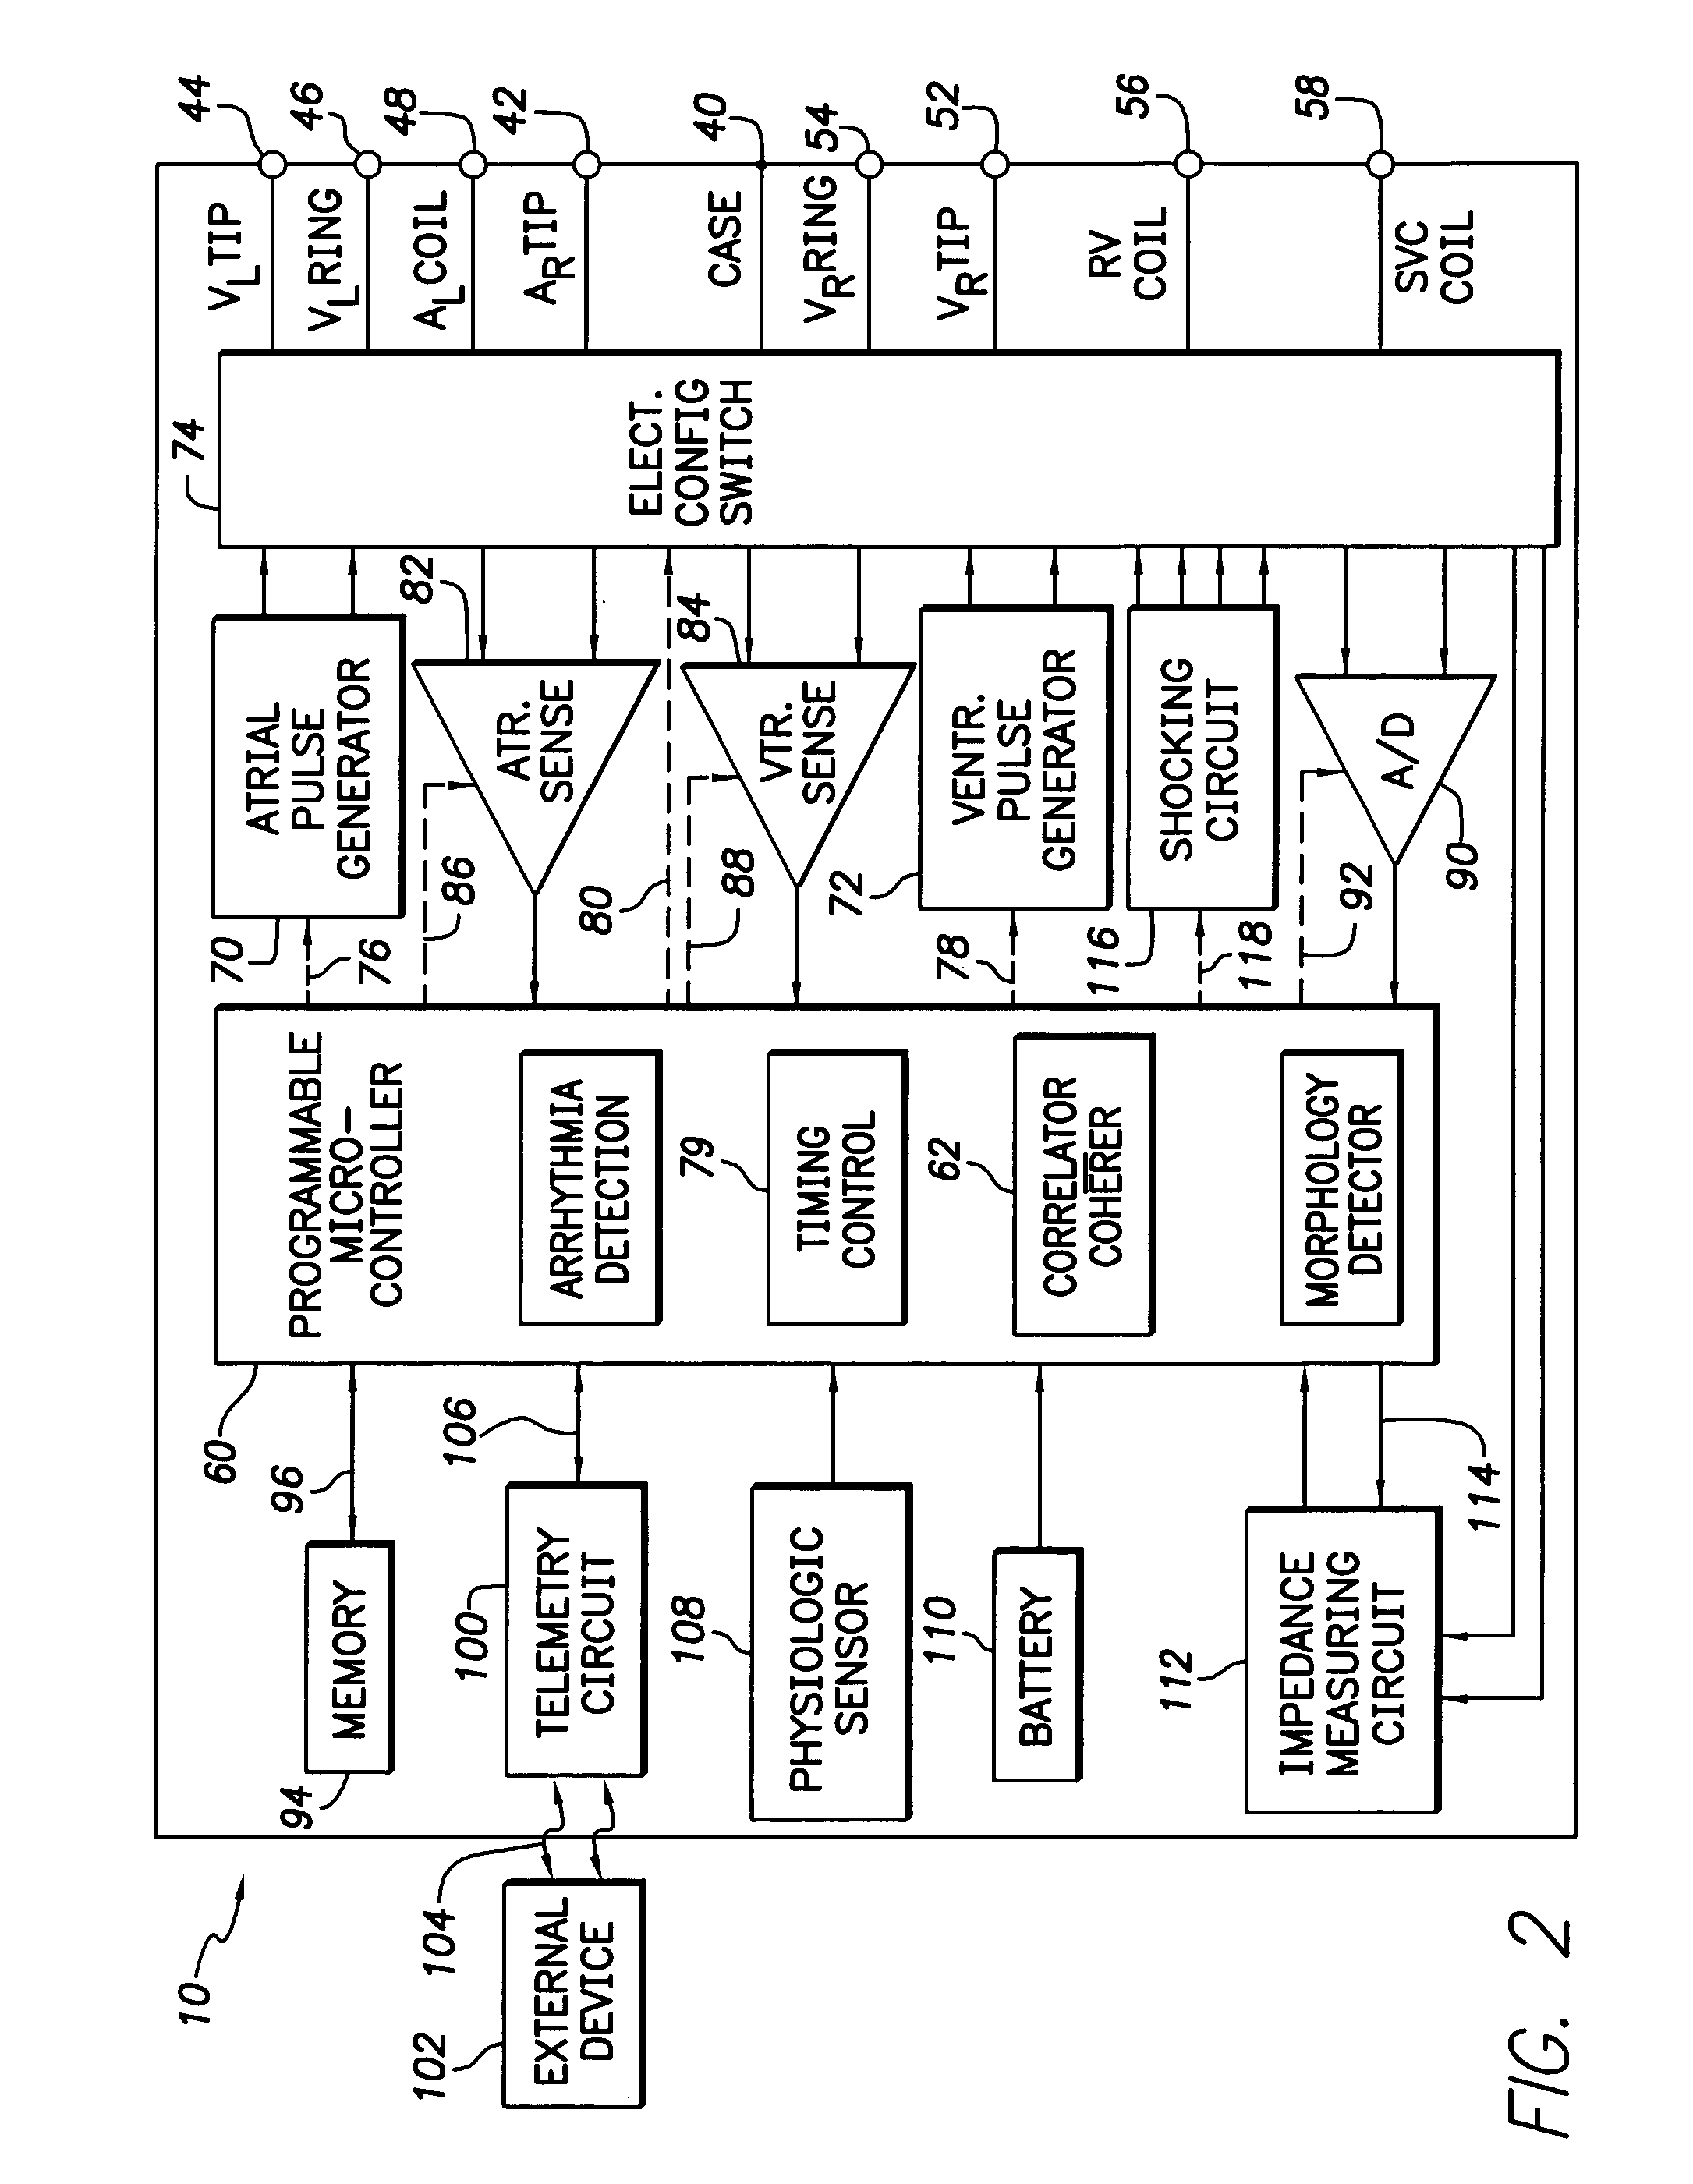 Implantable cardiac stimulation device and method that discriminates between and treats ventricular tachycardia and ventricular fibrillation